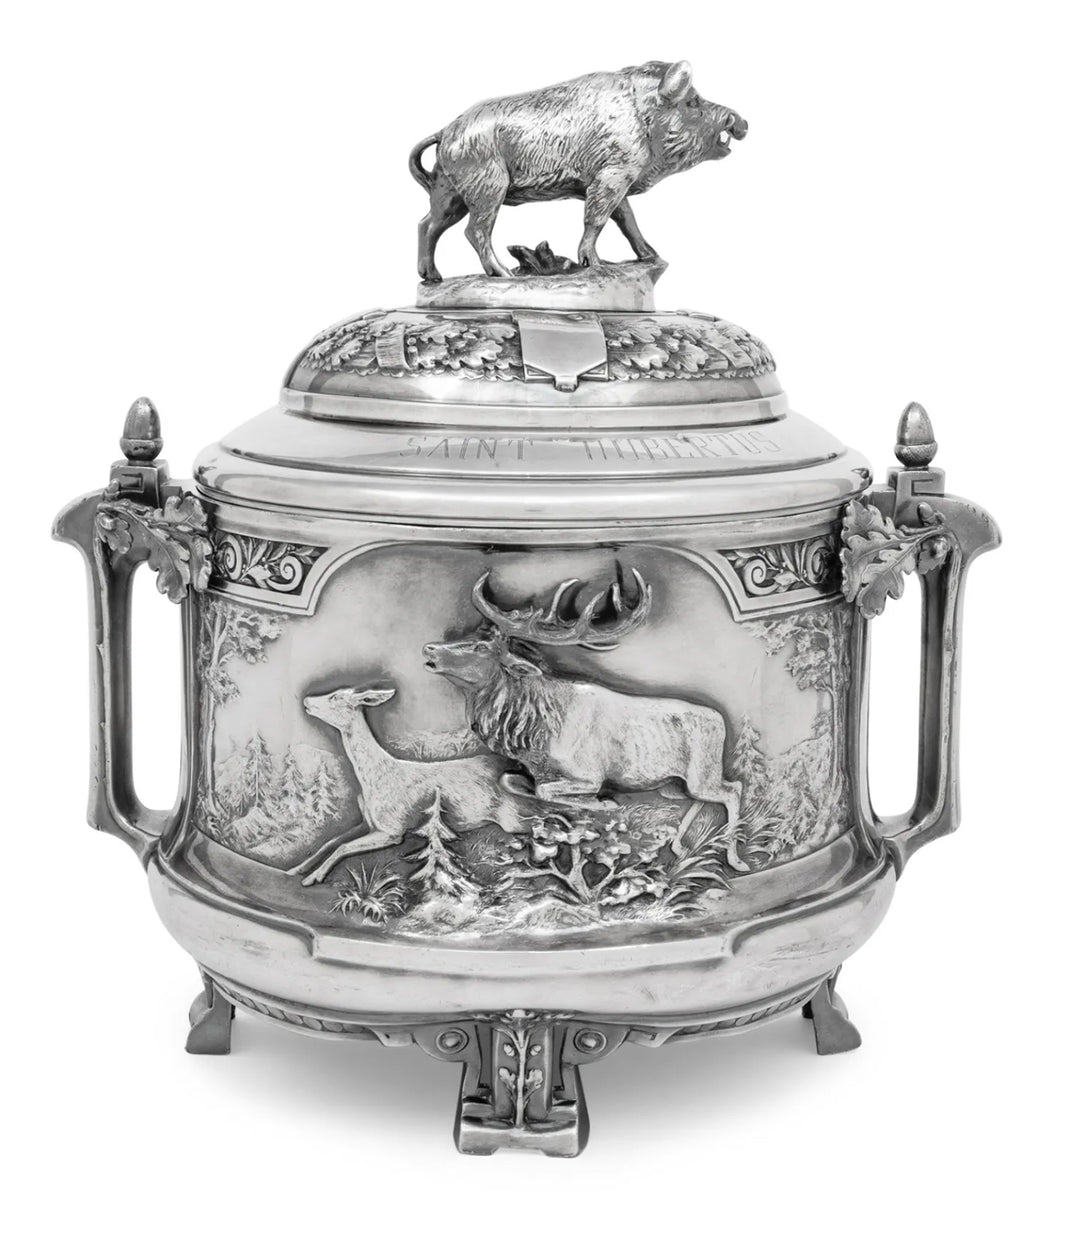 Early 20th Century German Silver-Plate Tureen